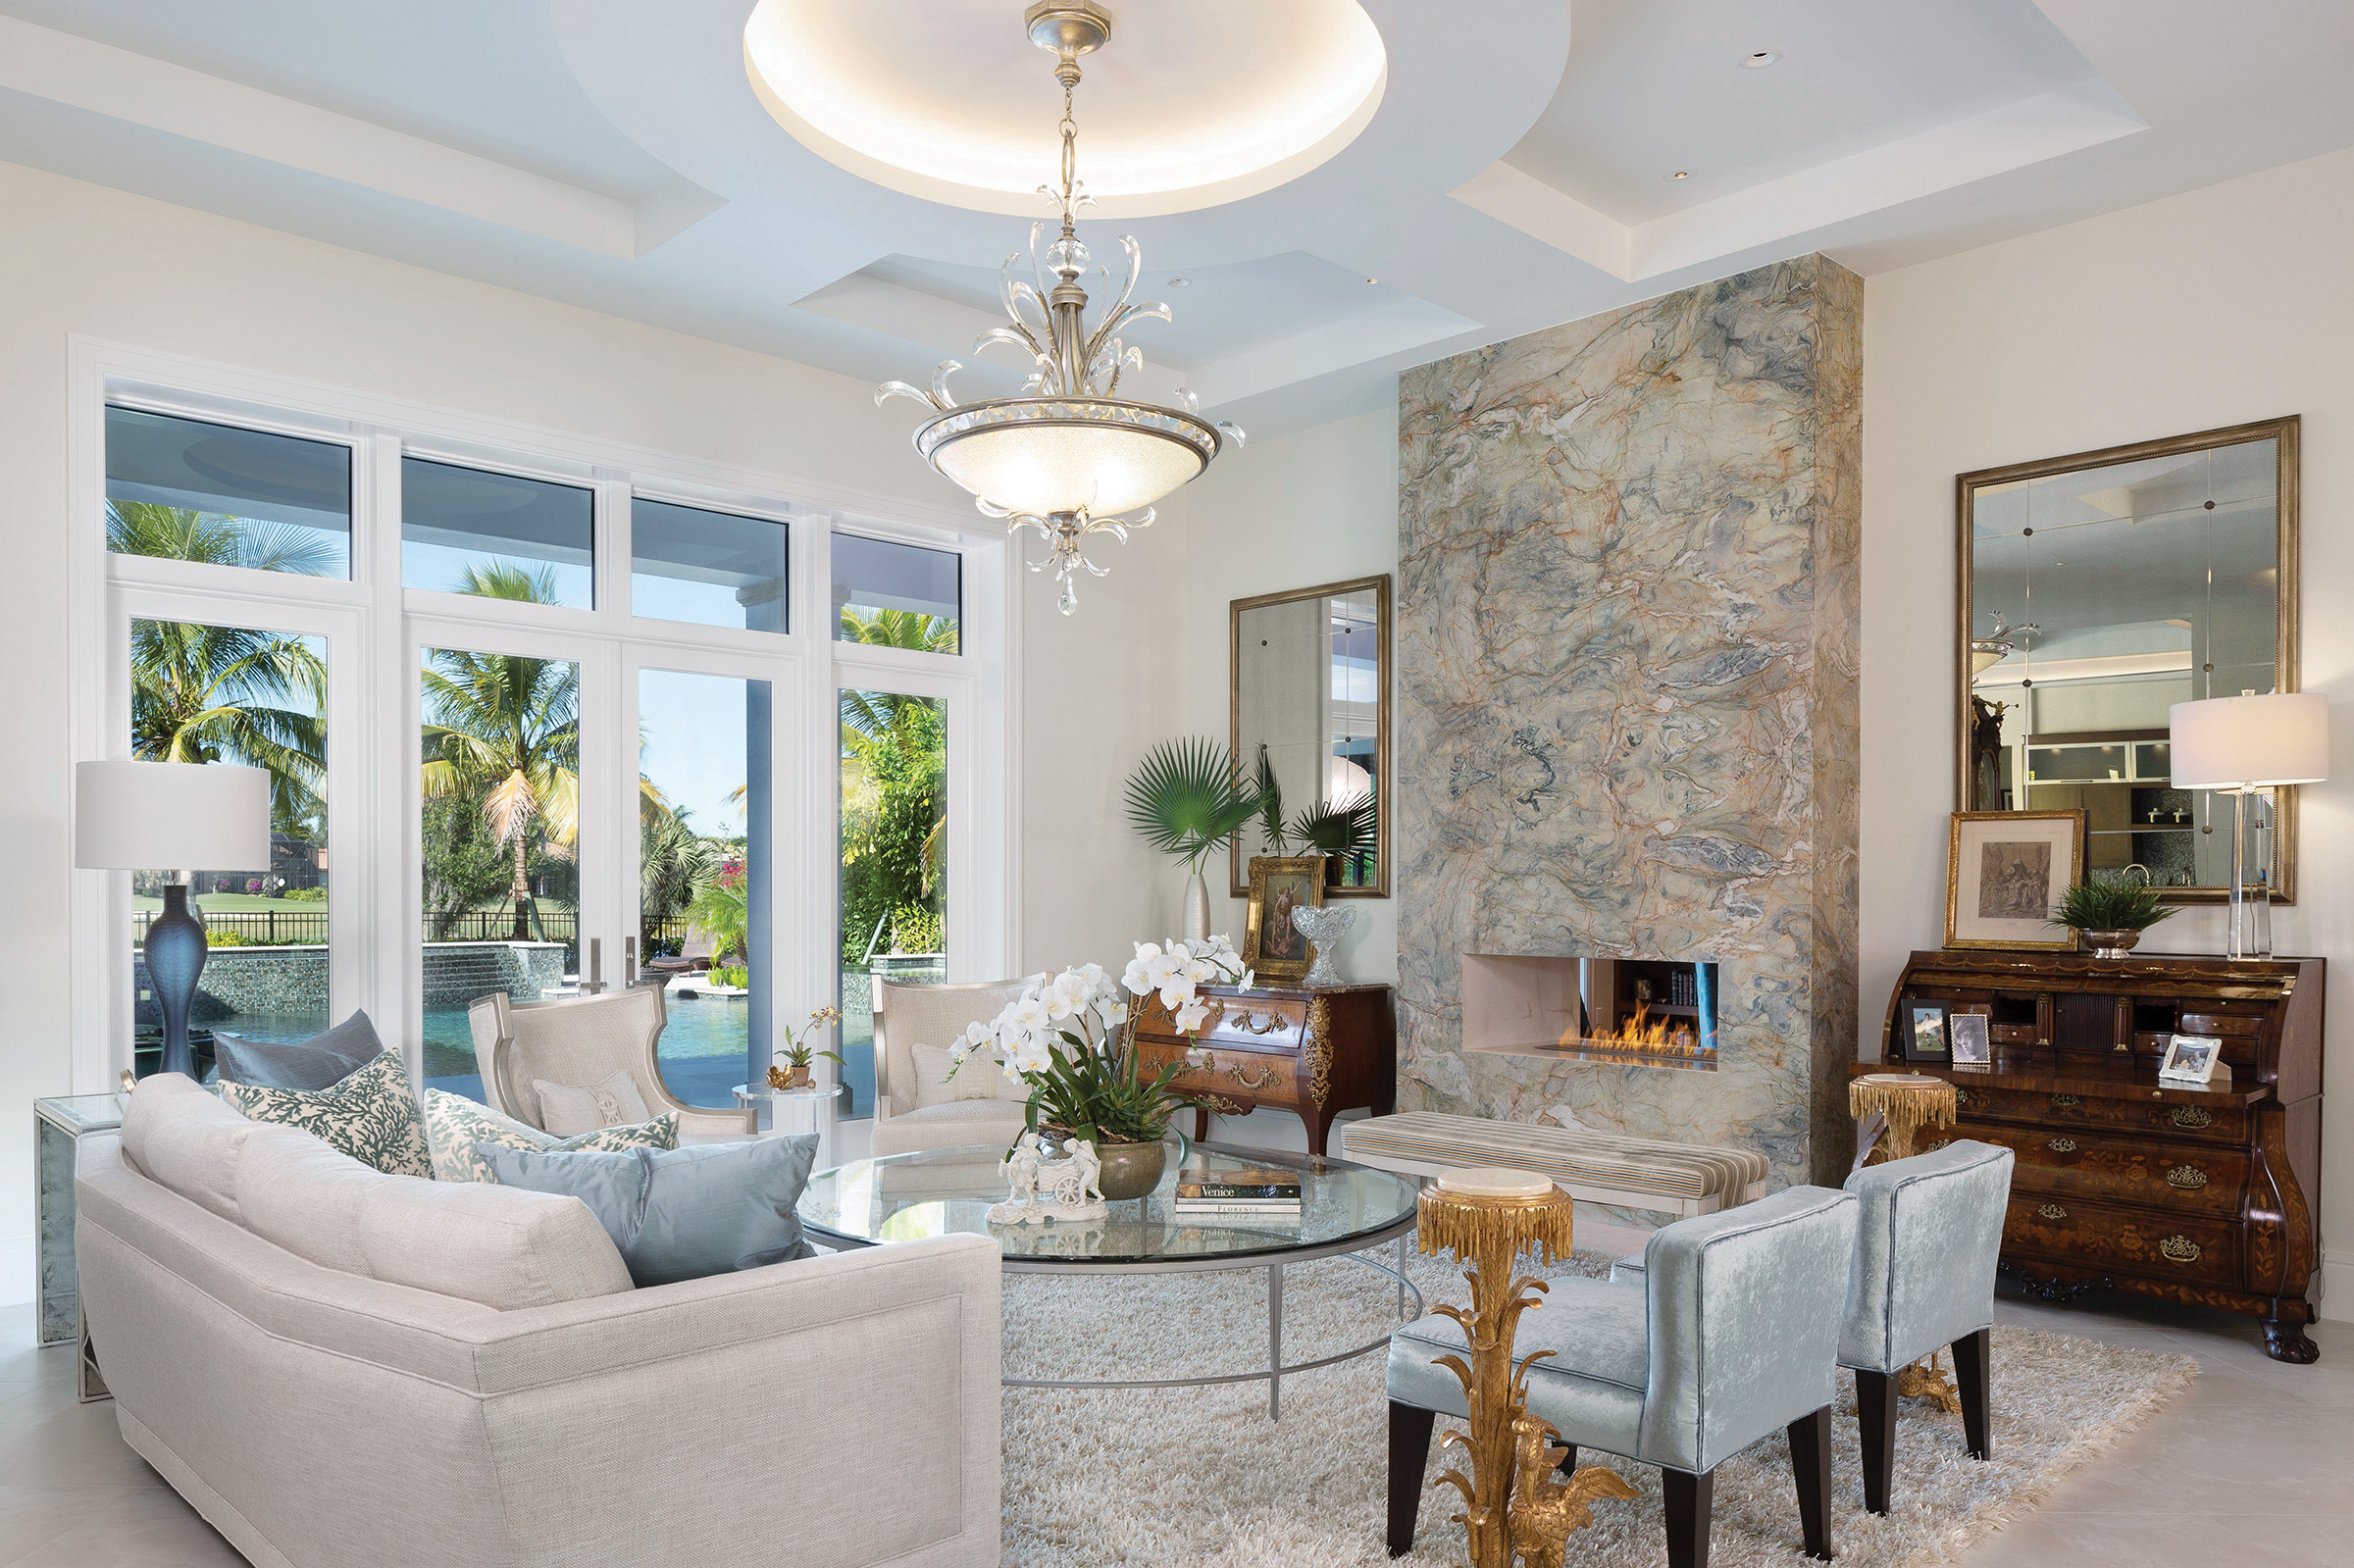  Inside, the formal living room is elegant and spacious thanks to the experts at Clive Daniel Home. Distinctive ceilings with floating LED accents and light wells provide a beautiful glow. The living room’s see-through Isokern fireplace with mitered 